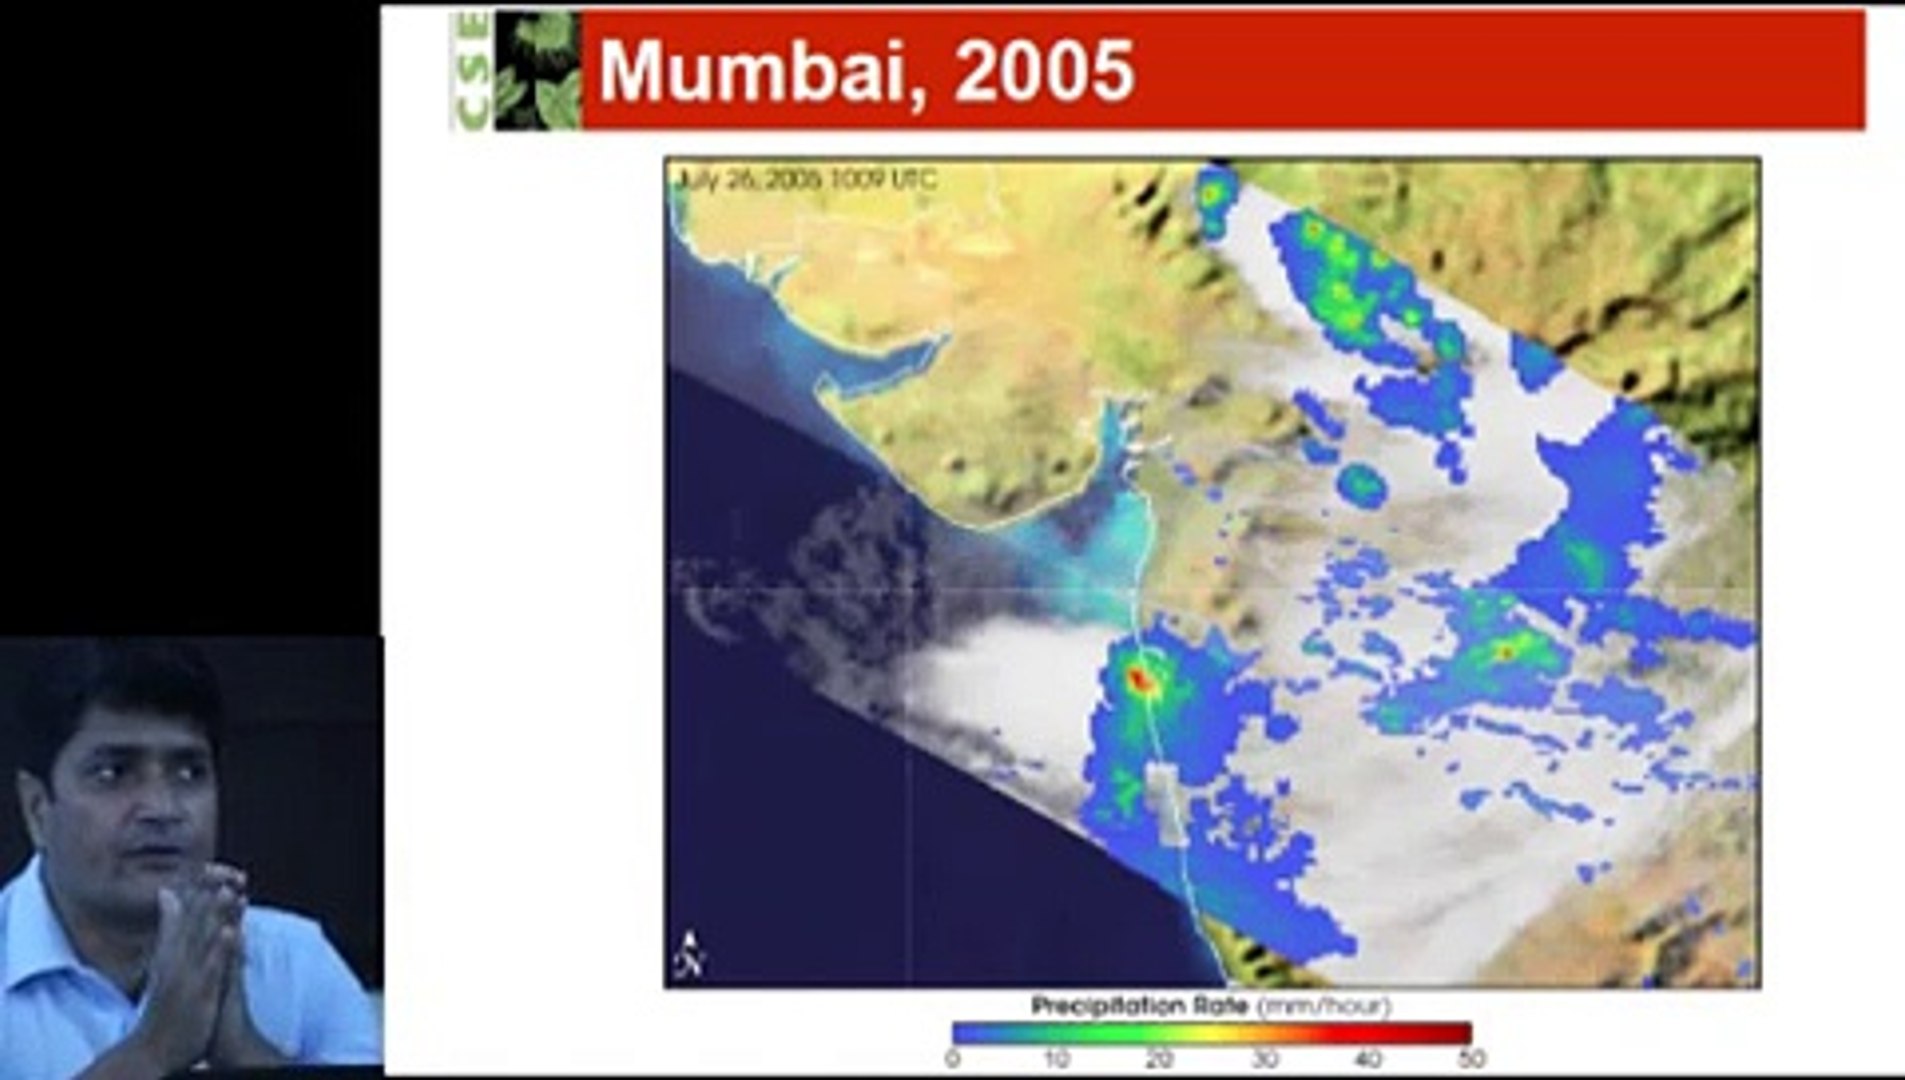 Climatic change and freak weather events in India